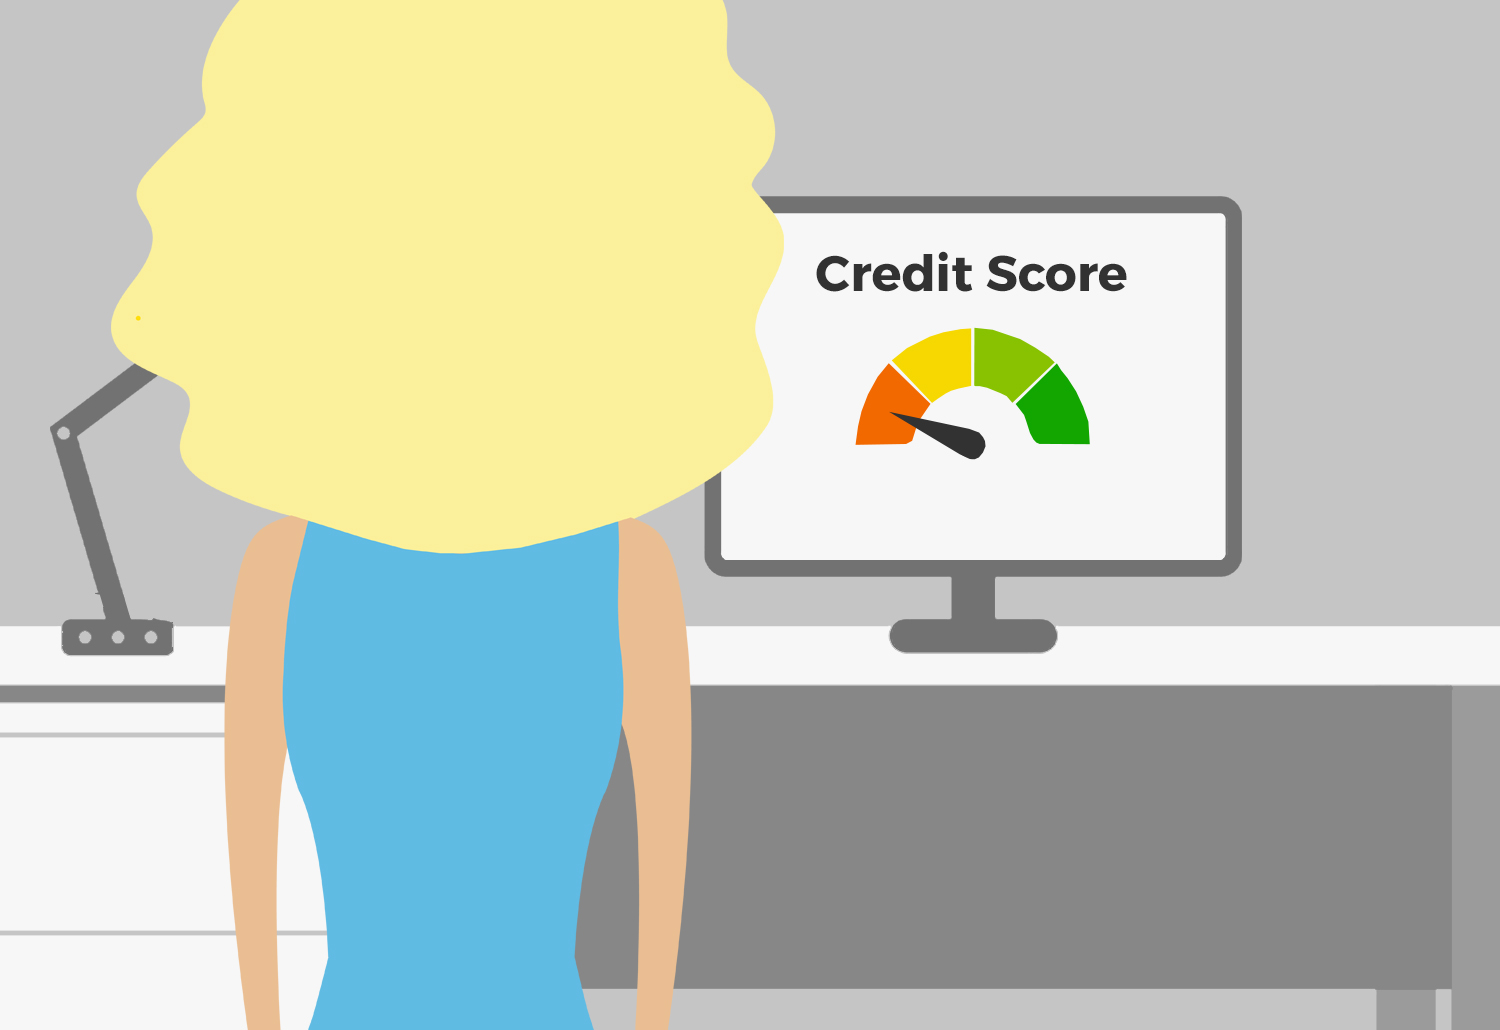 How can I improve my Credit Score?